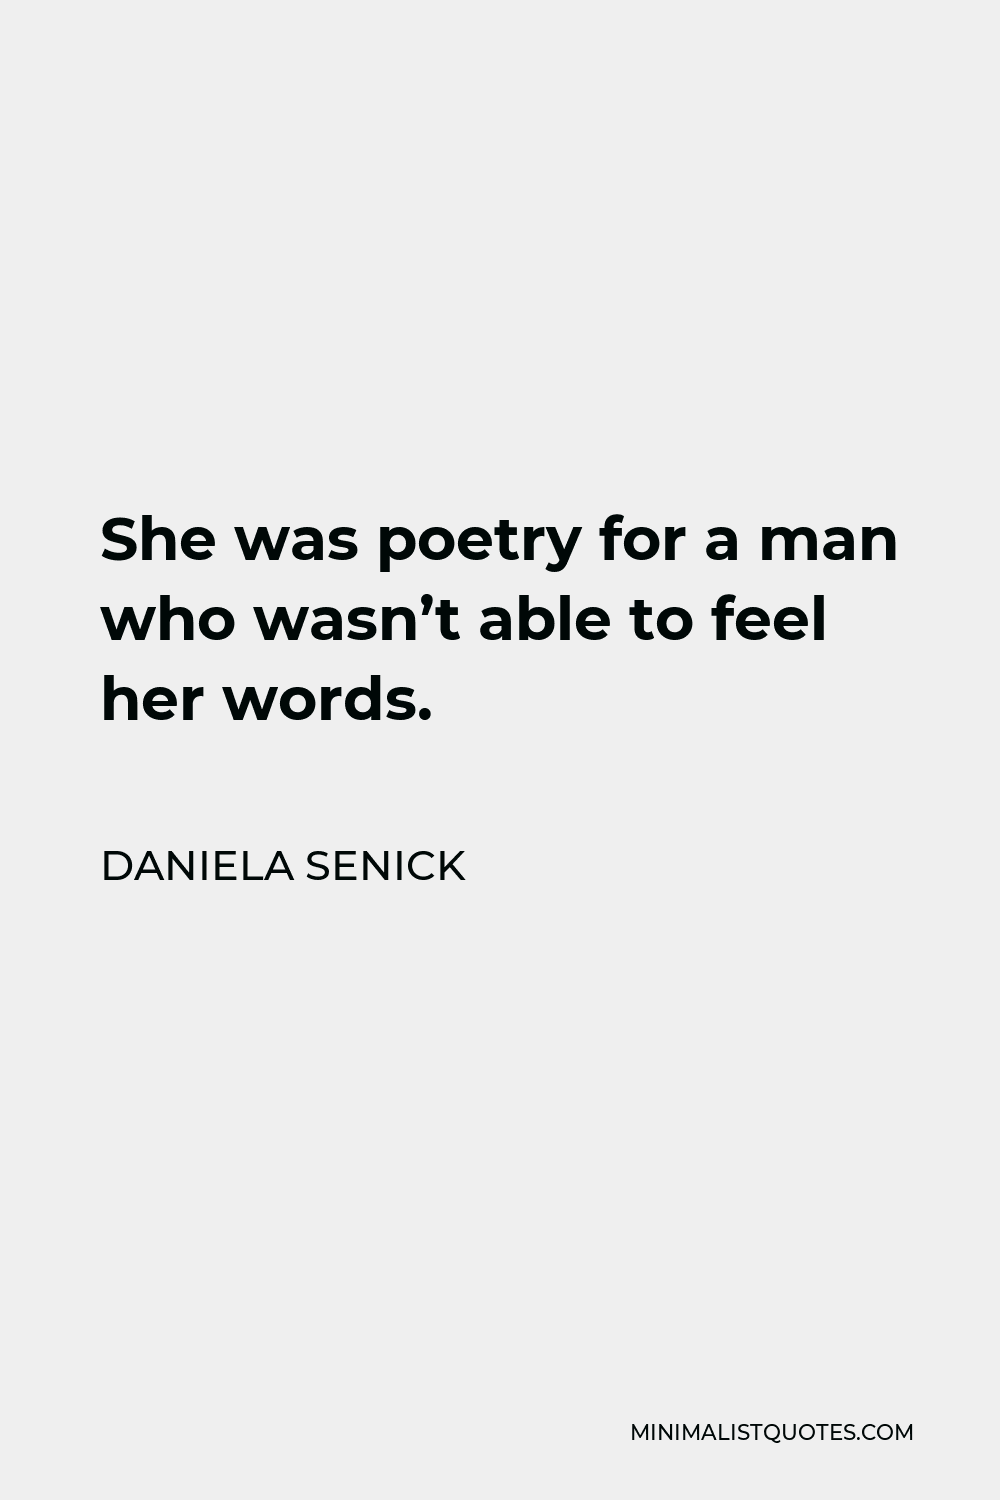 Daniela Senick Quote - She was poetry for a man who wasn’t able to feel her words.